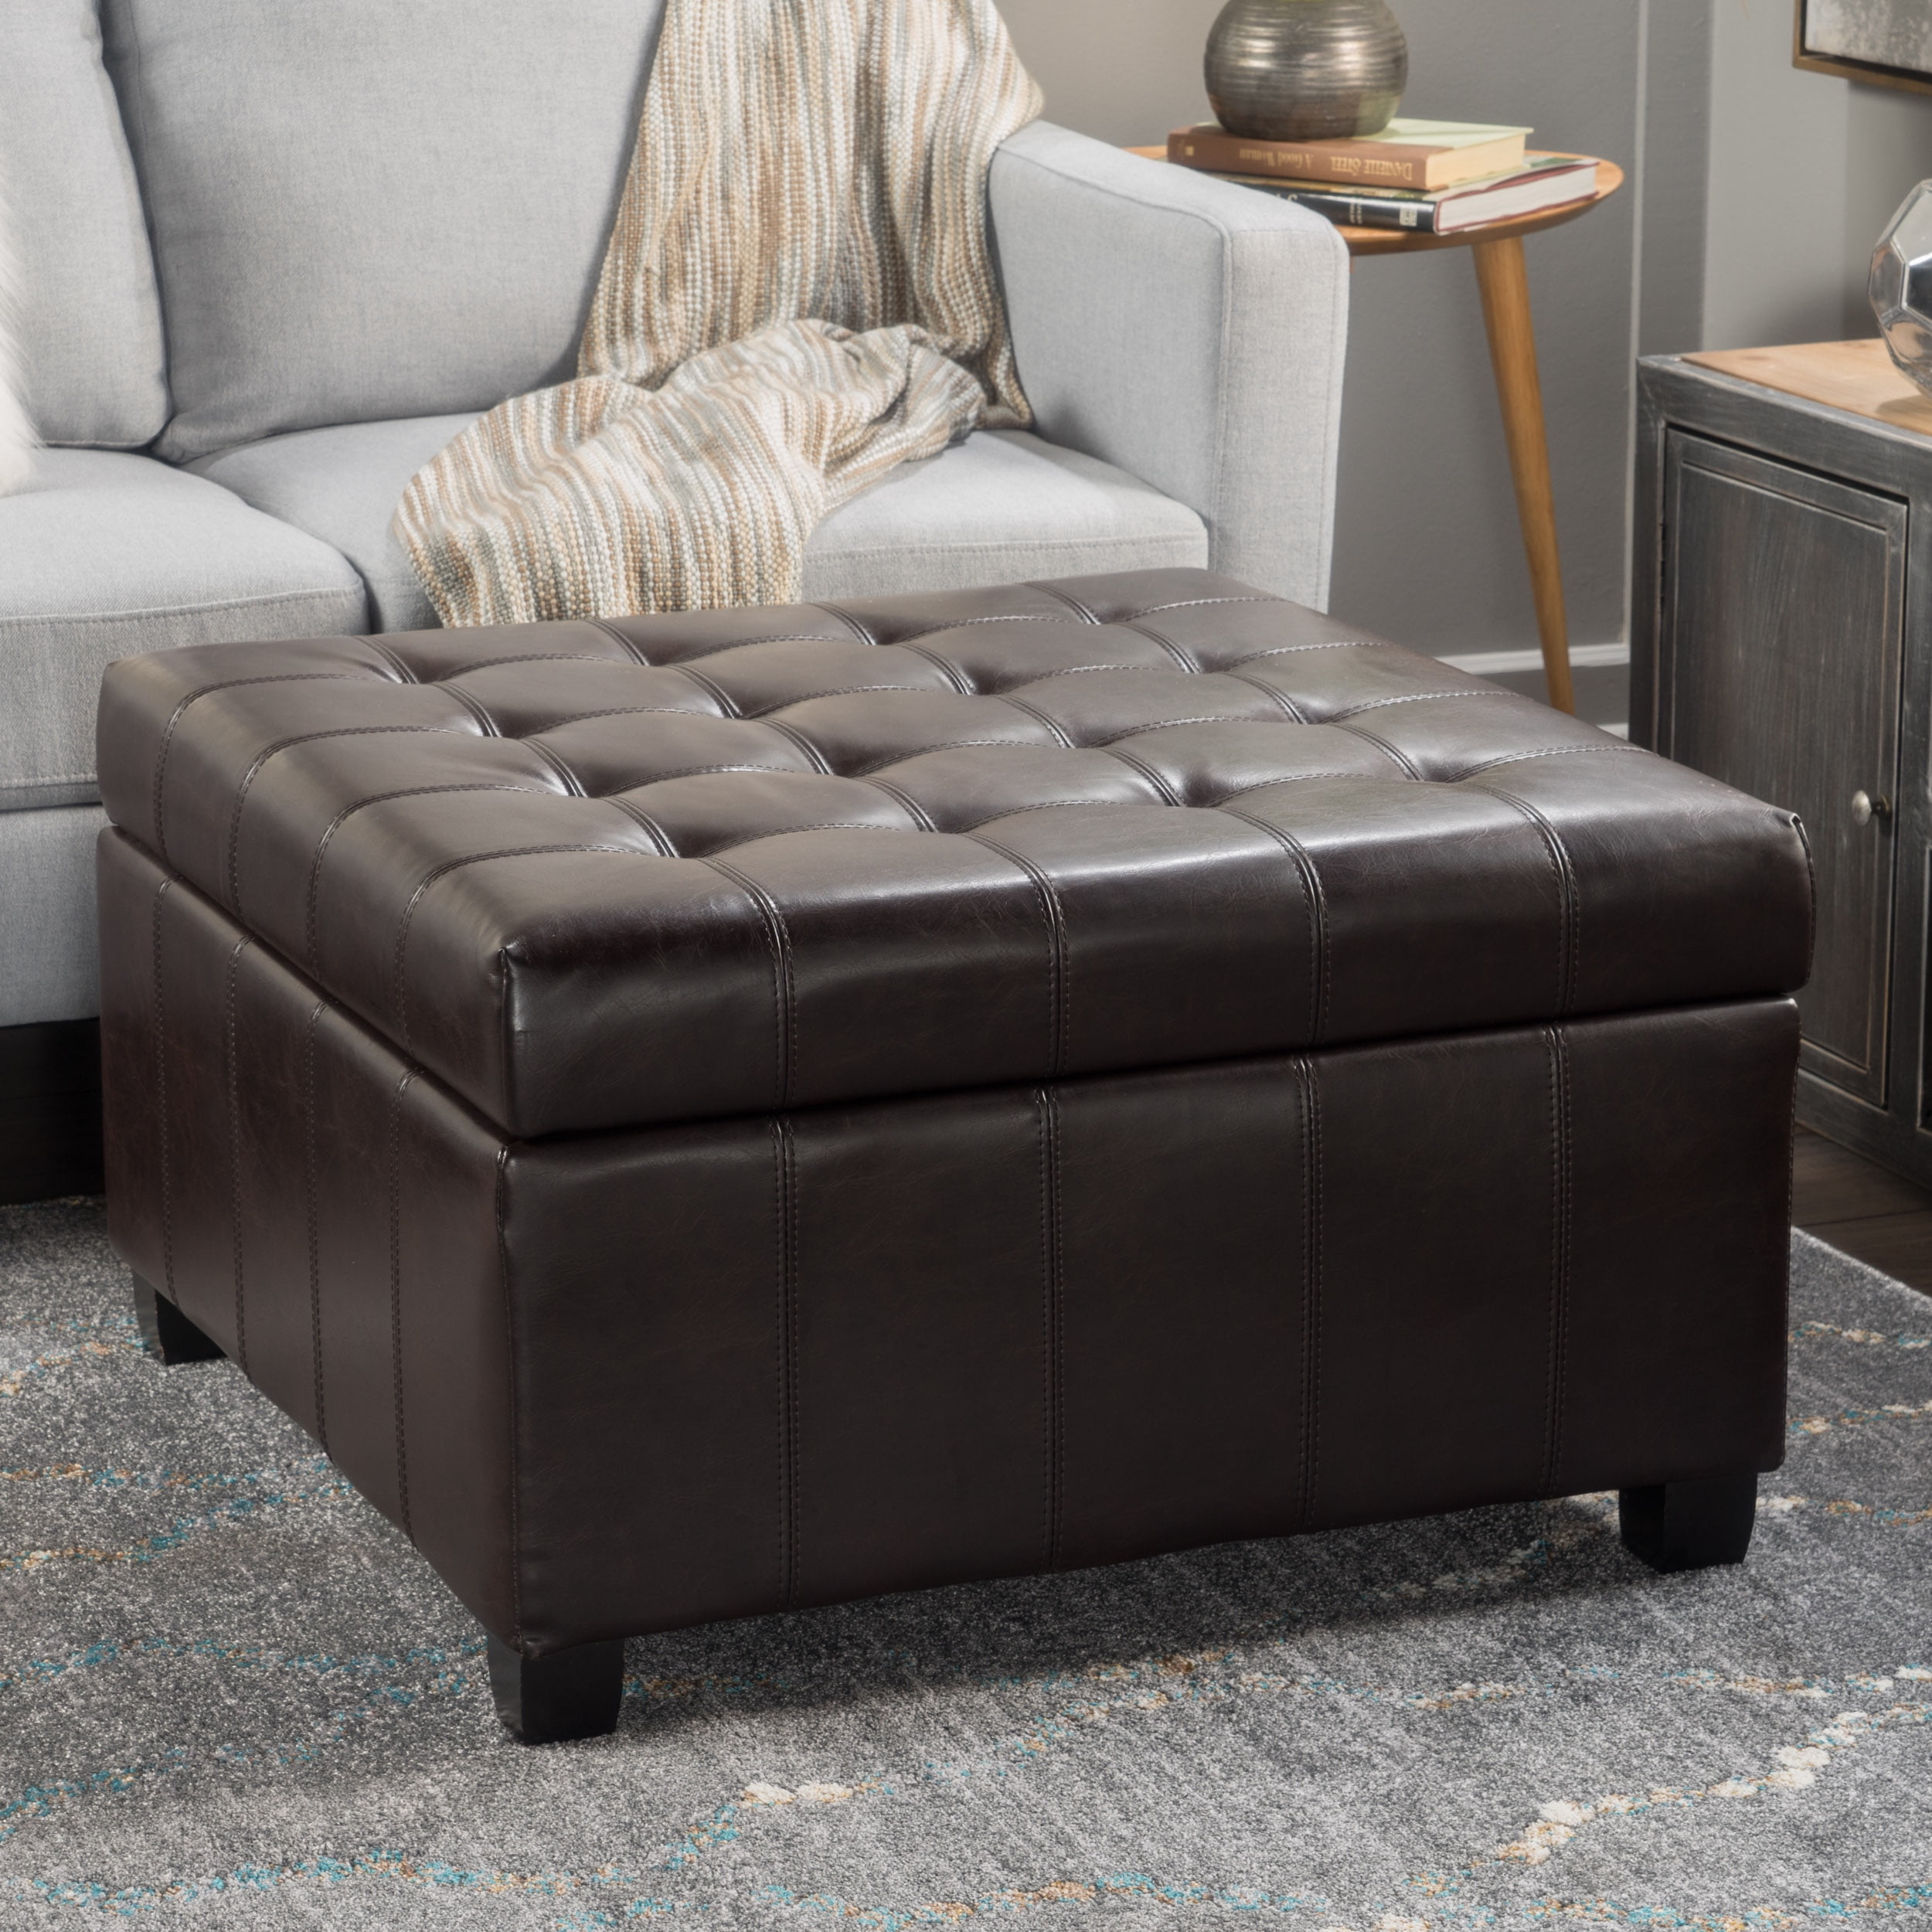 Alondra Contemporary Tufted Bonded, Brown Leather Storage Ottoman